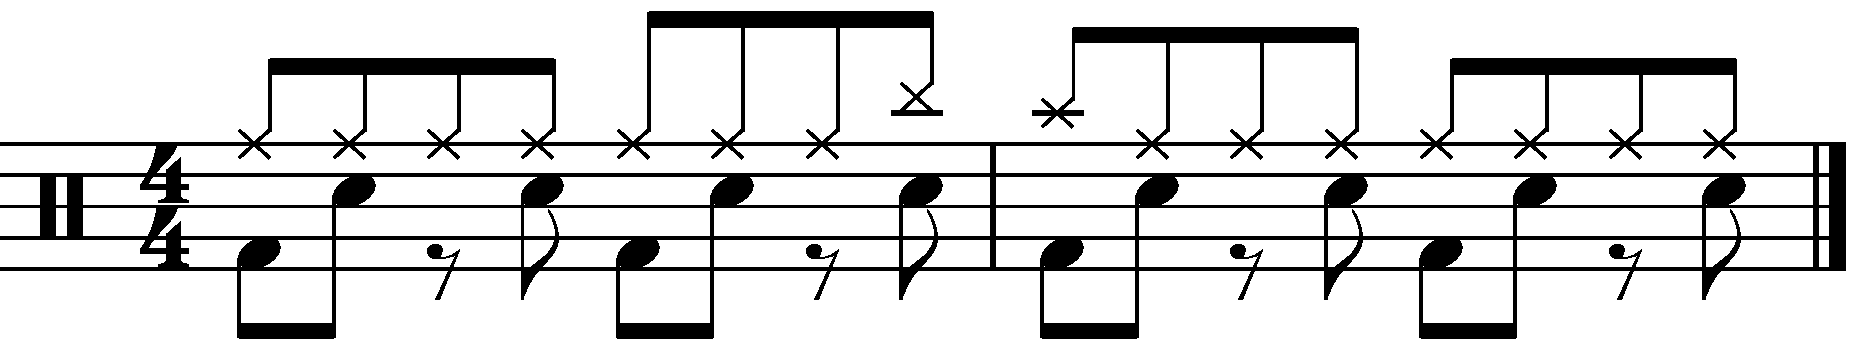 The concept applied to a half time groove with quarter note right hands